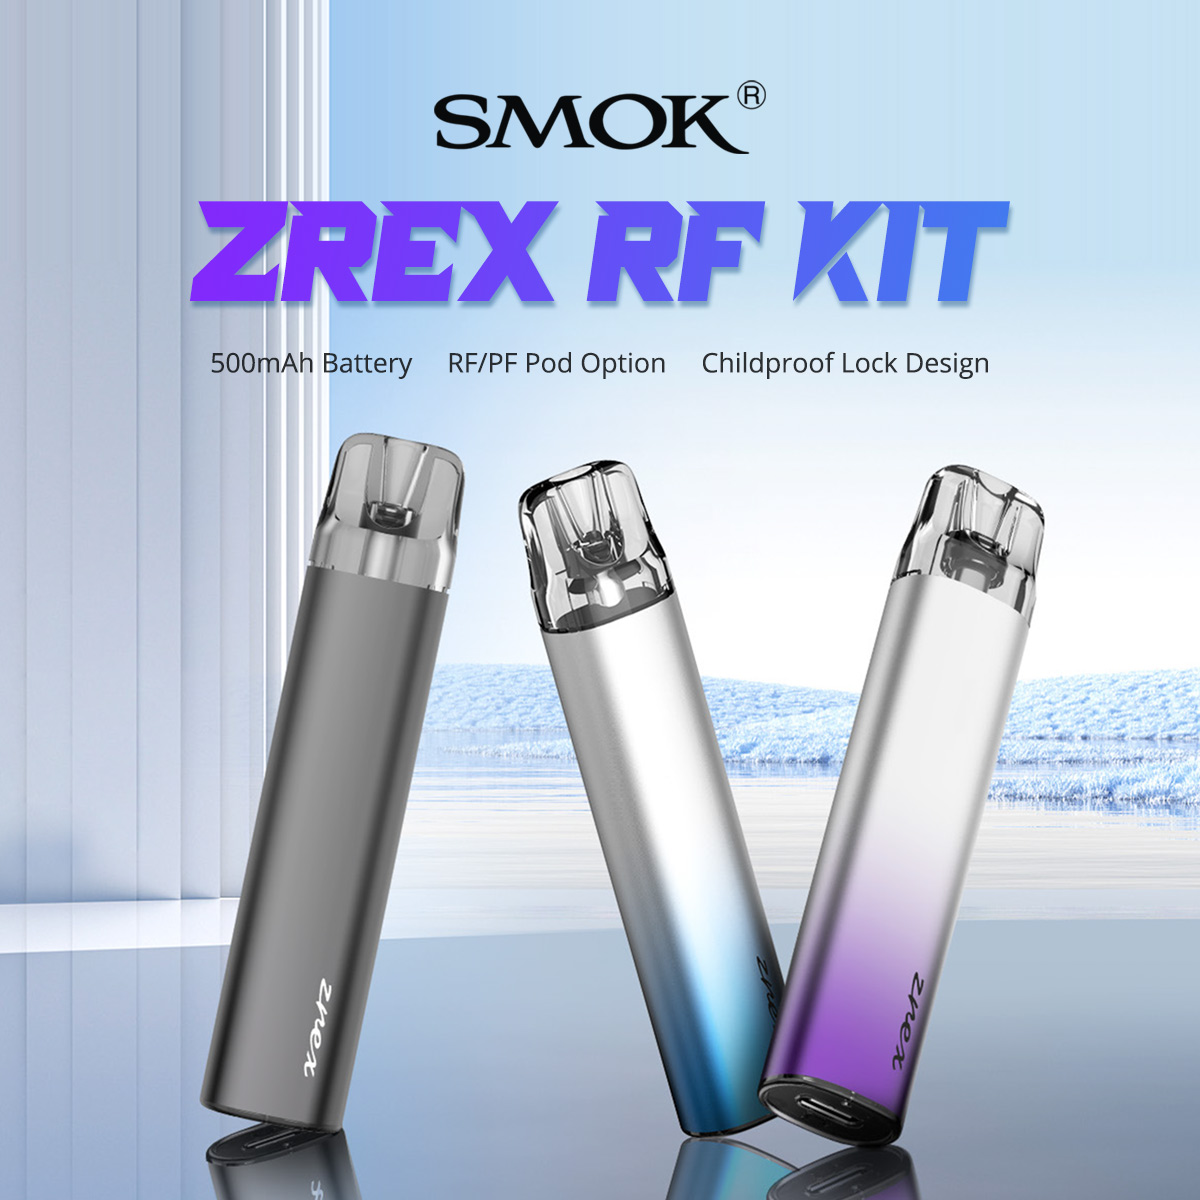 SMOK Zrex RF Kit 😍Built-in 500mAh battery 🥰Fit for PF/RF Pod Cartridge 😘2ml capacity, side filling ⚠ Warning: The device is used with e-liquid which contains addictive chemical nicotine. For Adult use only. #sourcemore #sourcemoreofficial #SMOK #ZrexRFKit #vapetricks